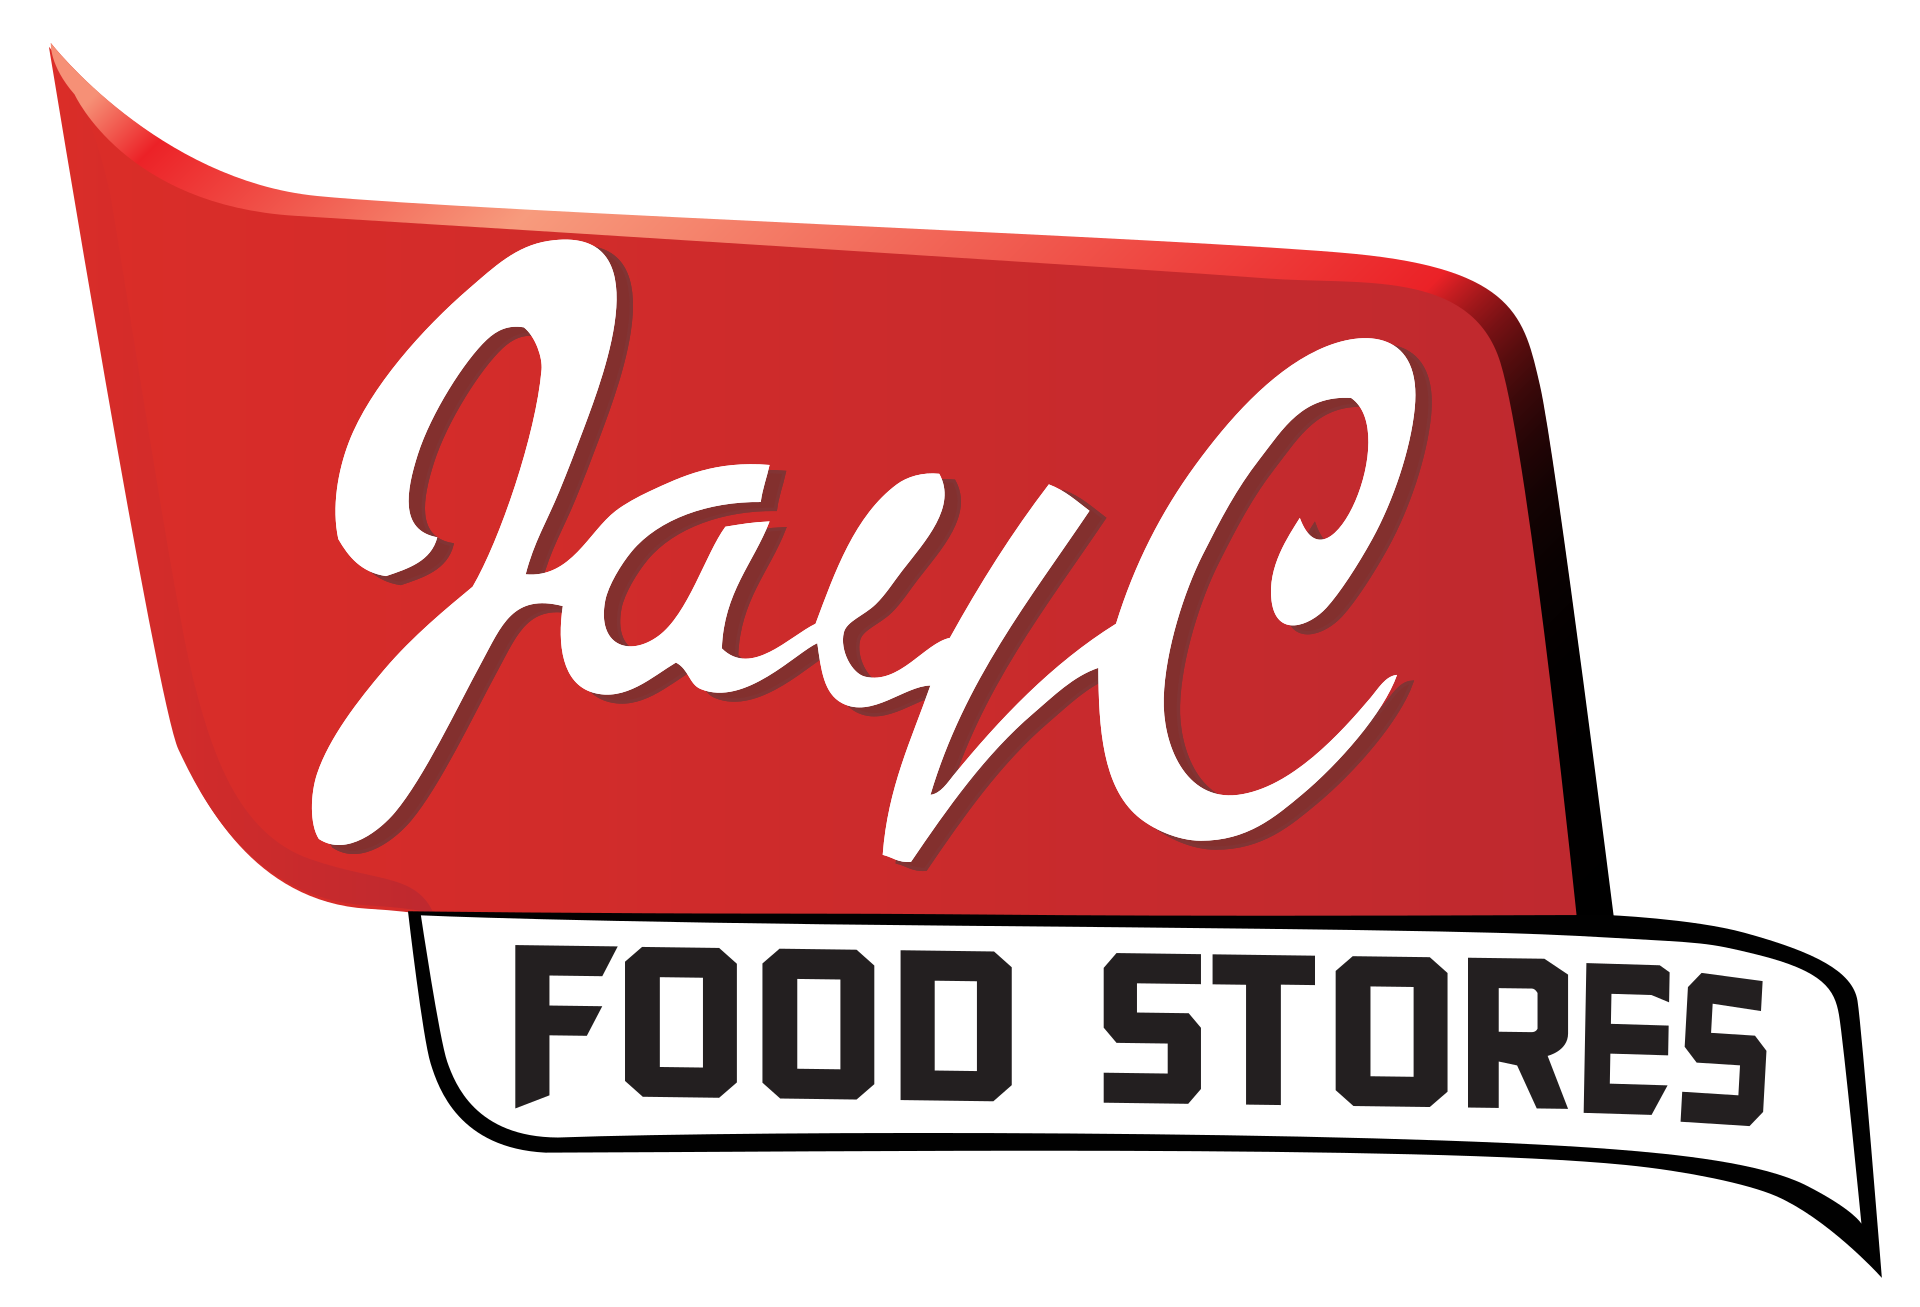 JayC Food Stores